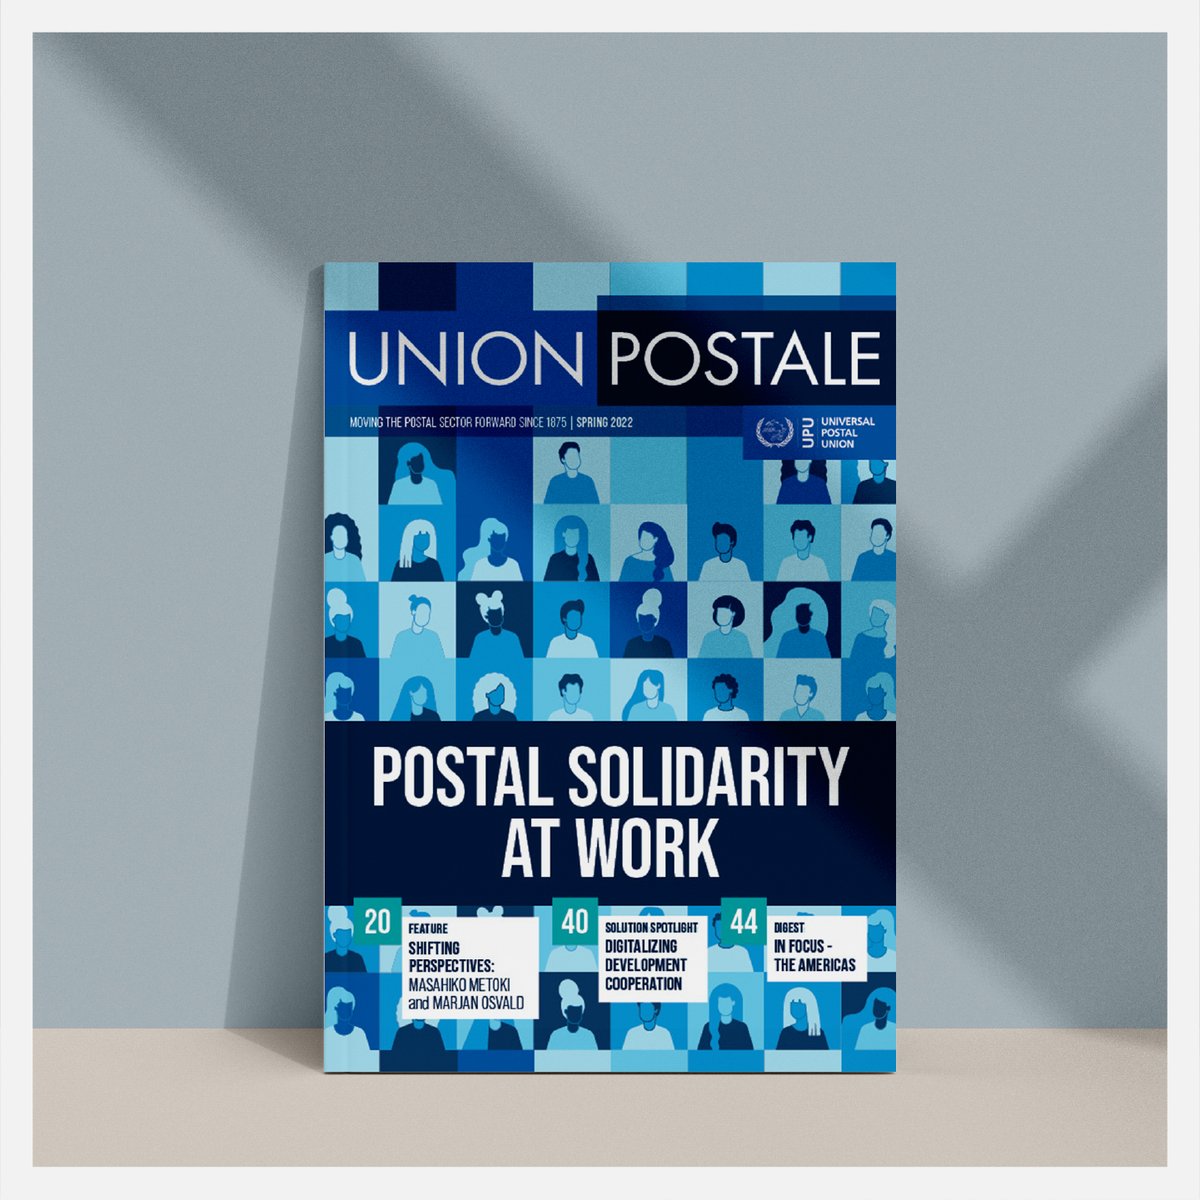 #Solidarity is the essence of the postal family.

The new issue of #UnionPostale explores how the postal sector transforms & adapts itself to ensure the highest standards of quality, #inclusion & trust - even in times of crisis.

Download your copy here👉bit.ly/3IB2QXi